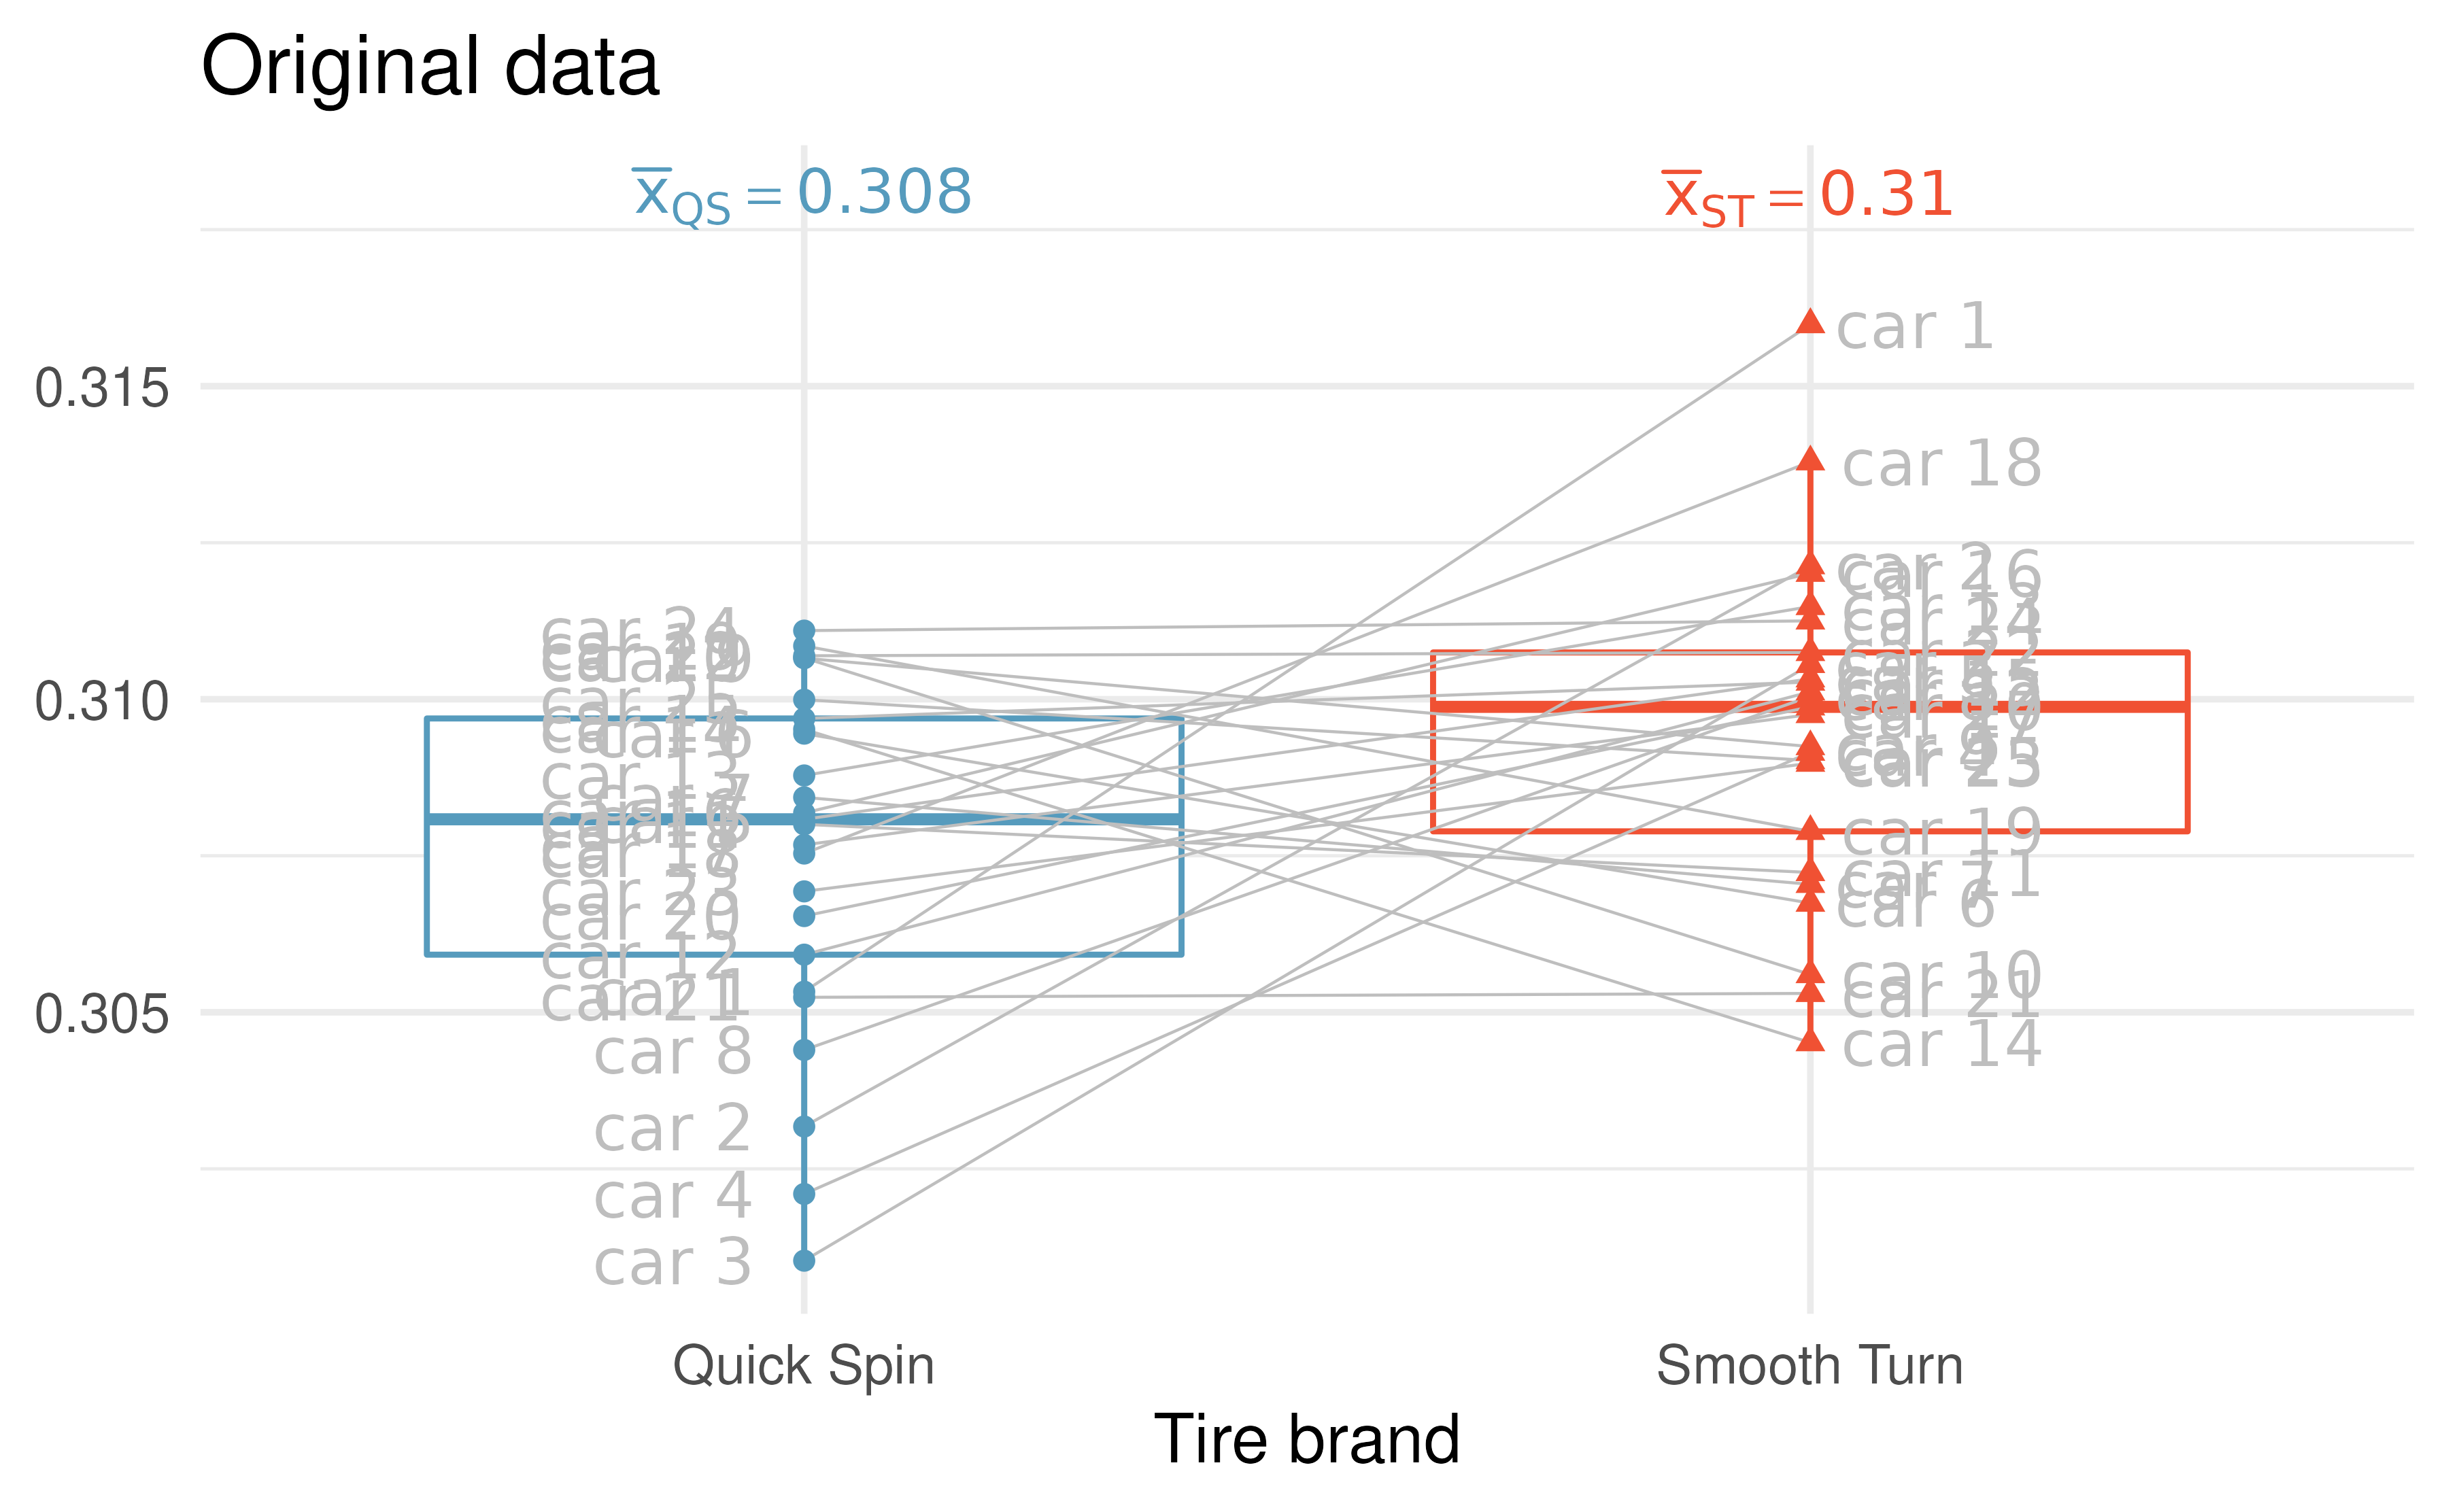 Boxplots of the tire tread data (in cm) and the brand of tire from which the original measurements came.